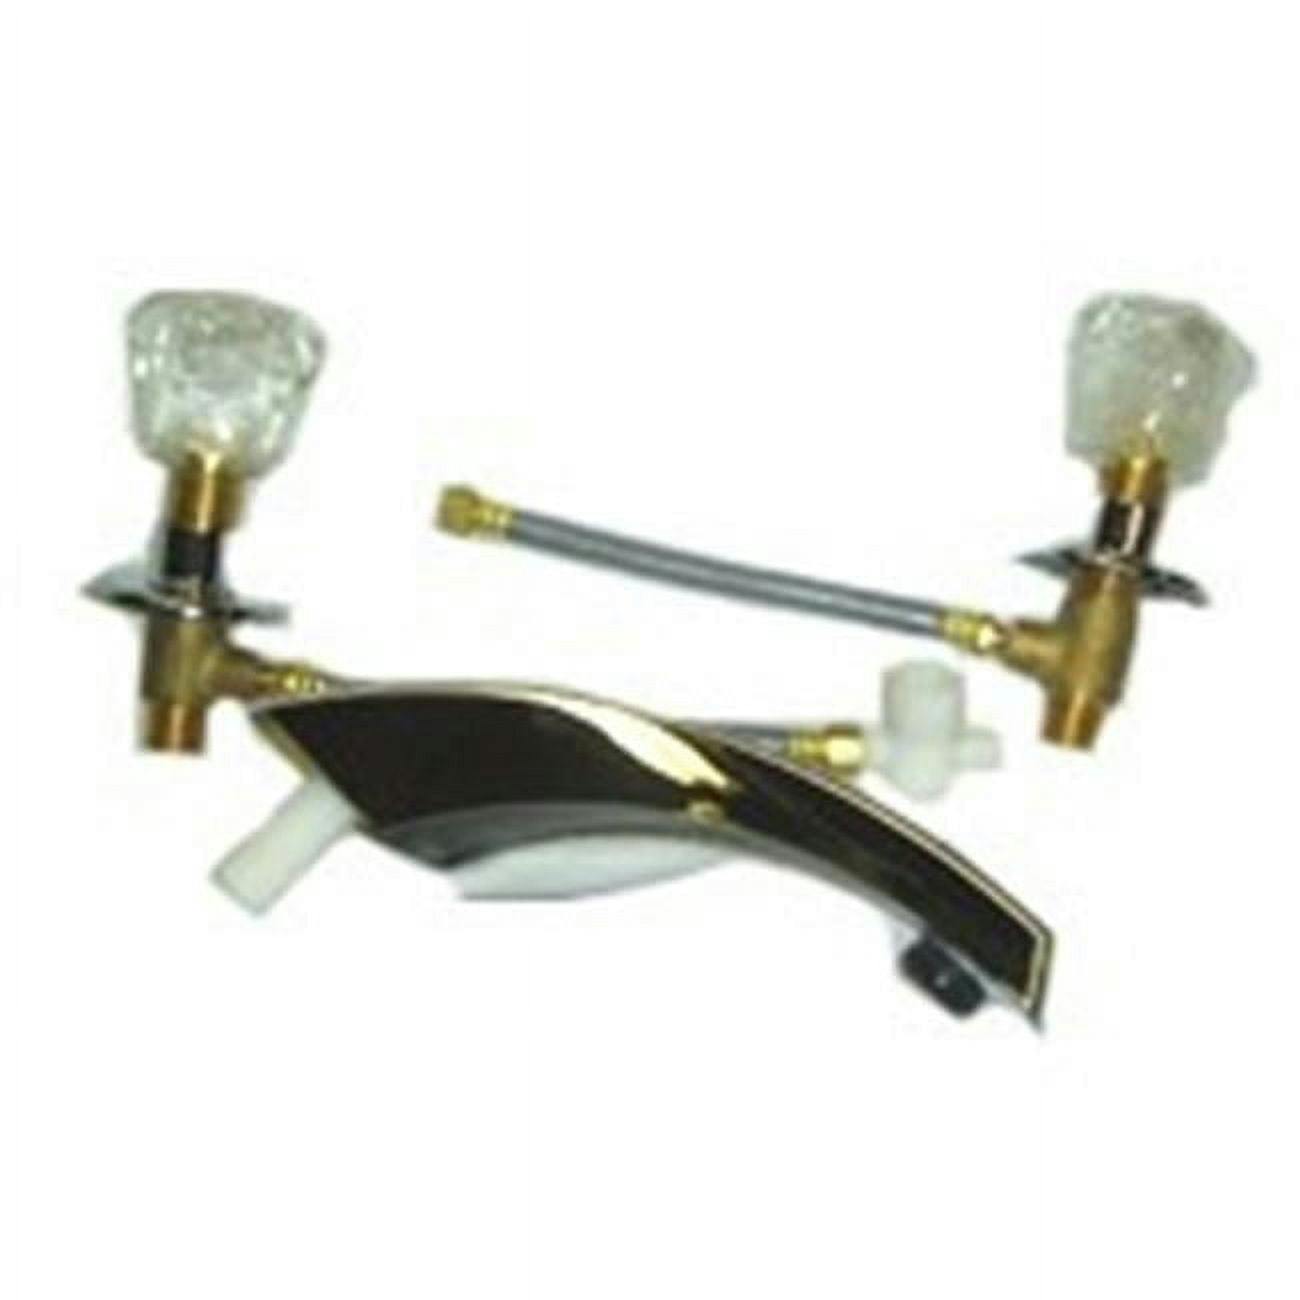 Adjustable Chrome Garden Tub Faucet with Brass Underbody